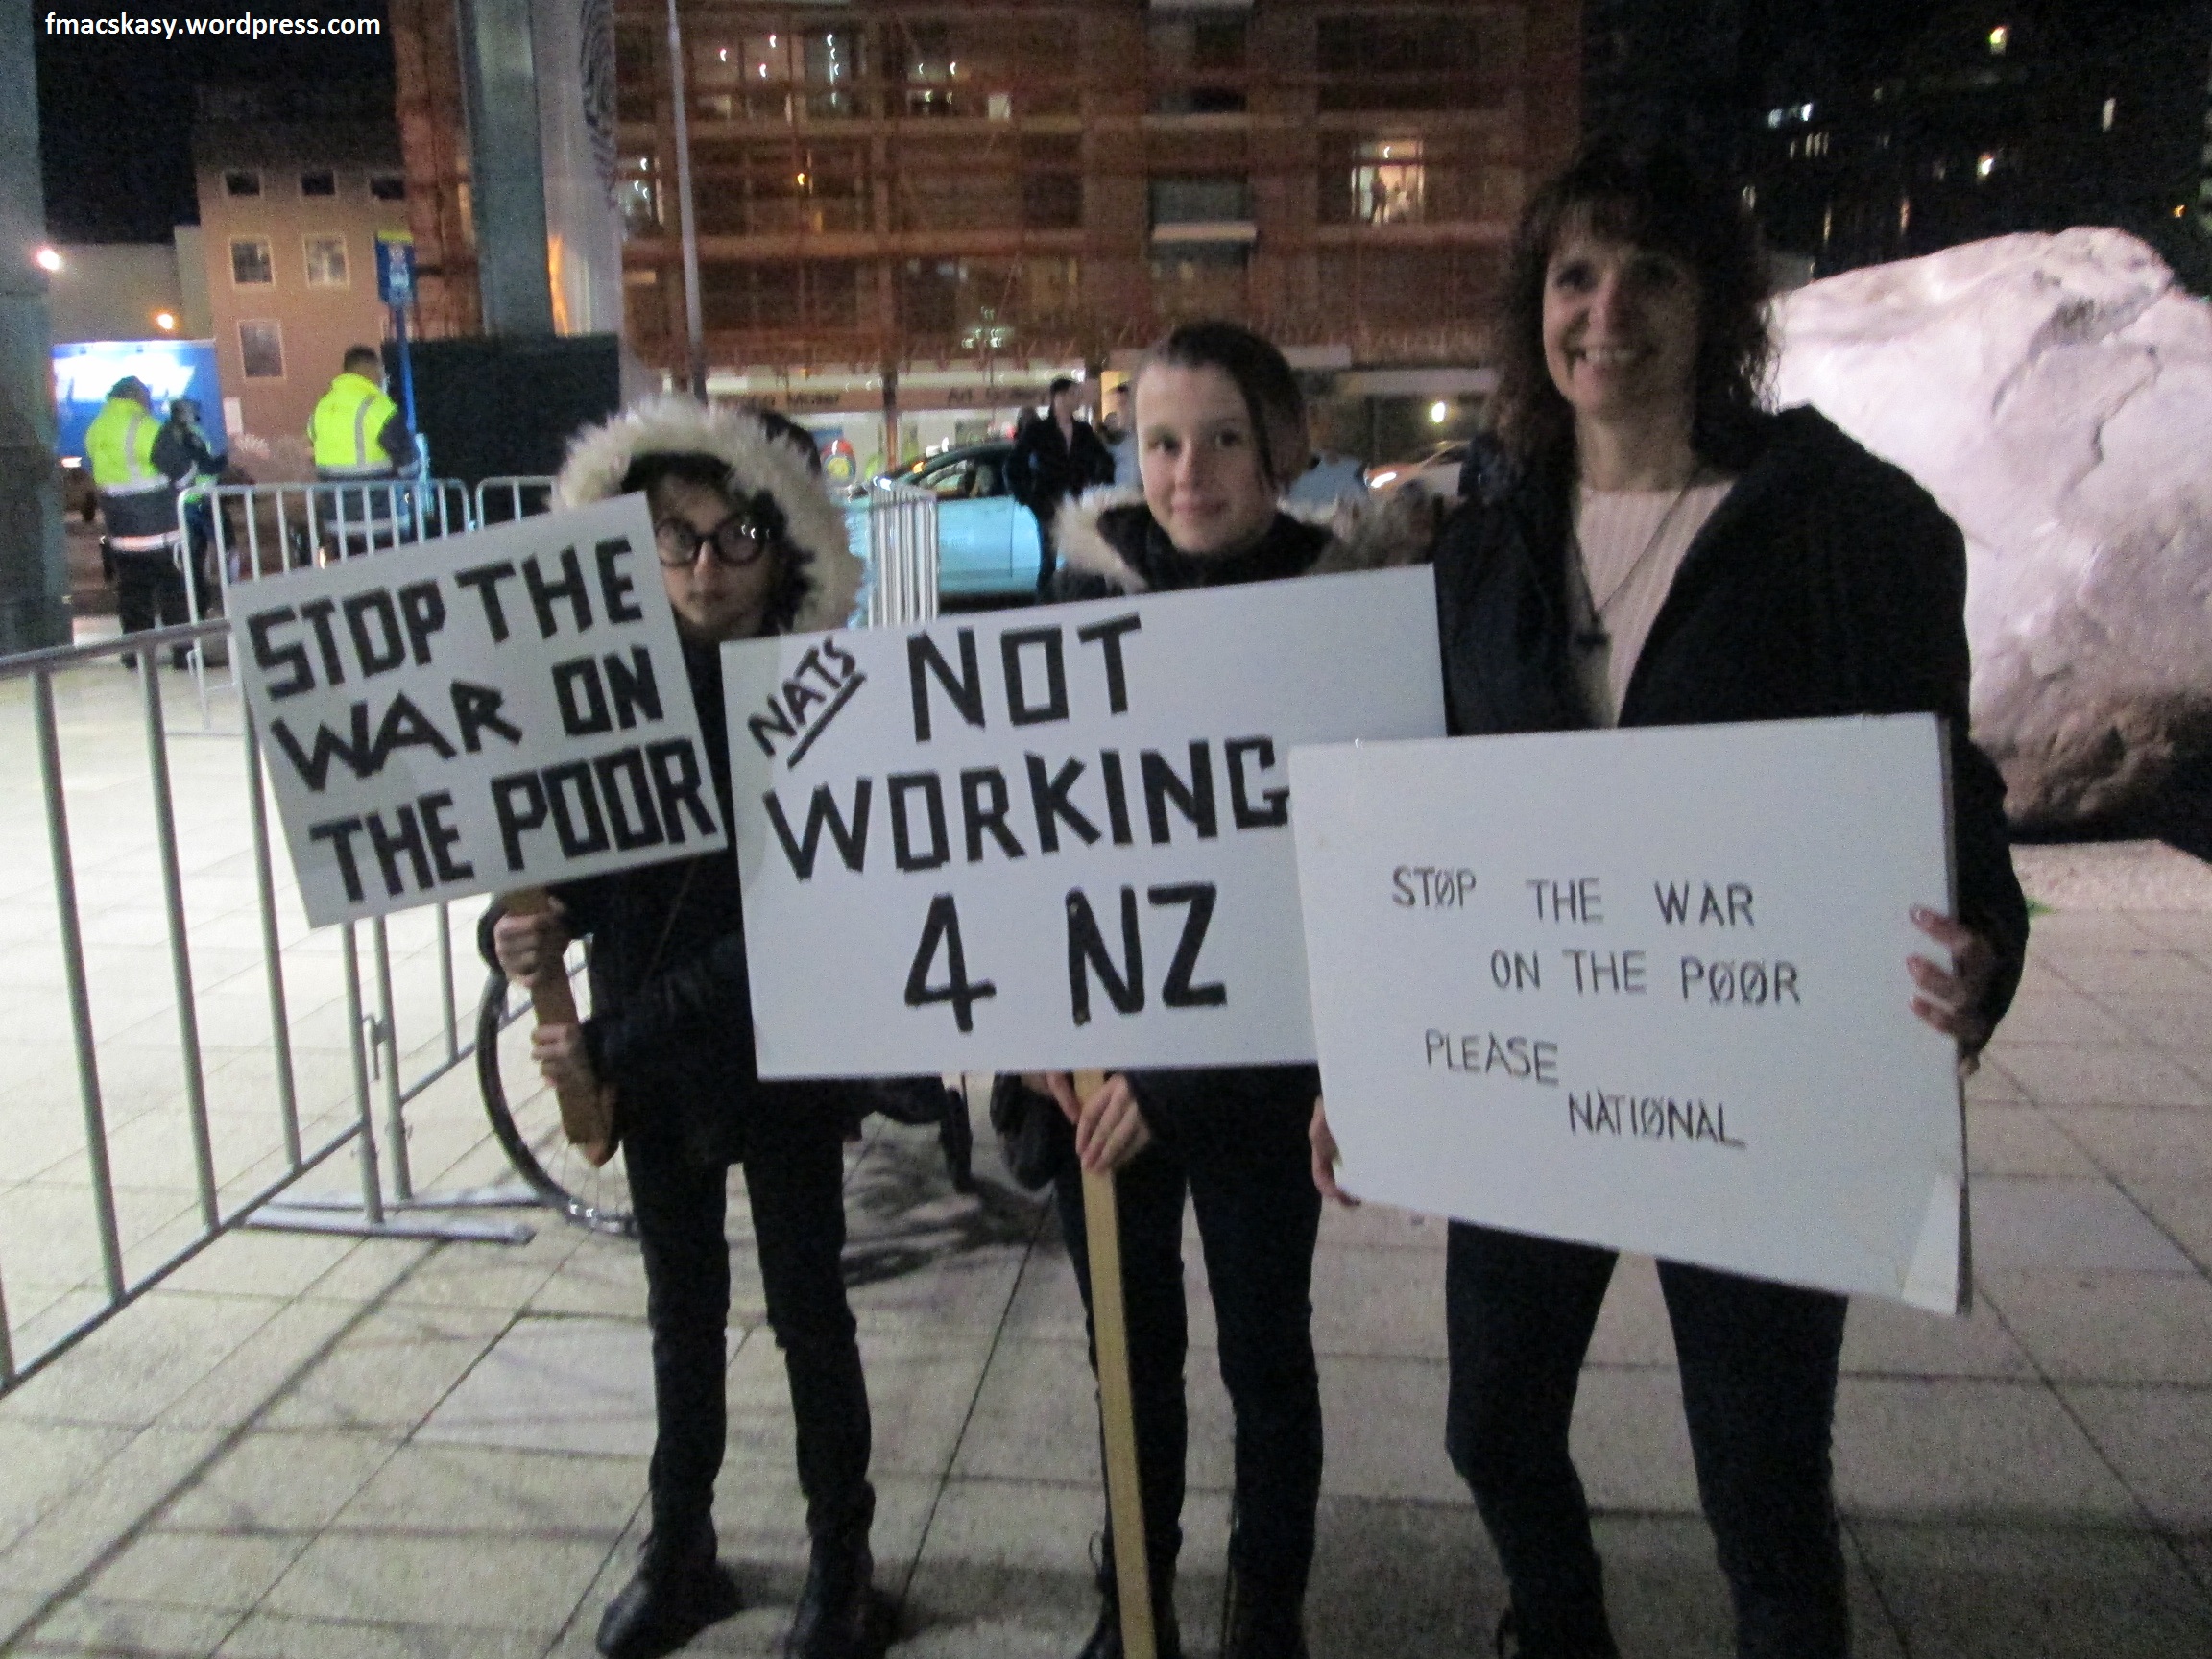 anti-National protest - Poneke Action Against Poverty - 28 June 2014 - Te Papa - Wellington (22)